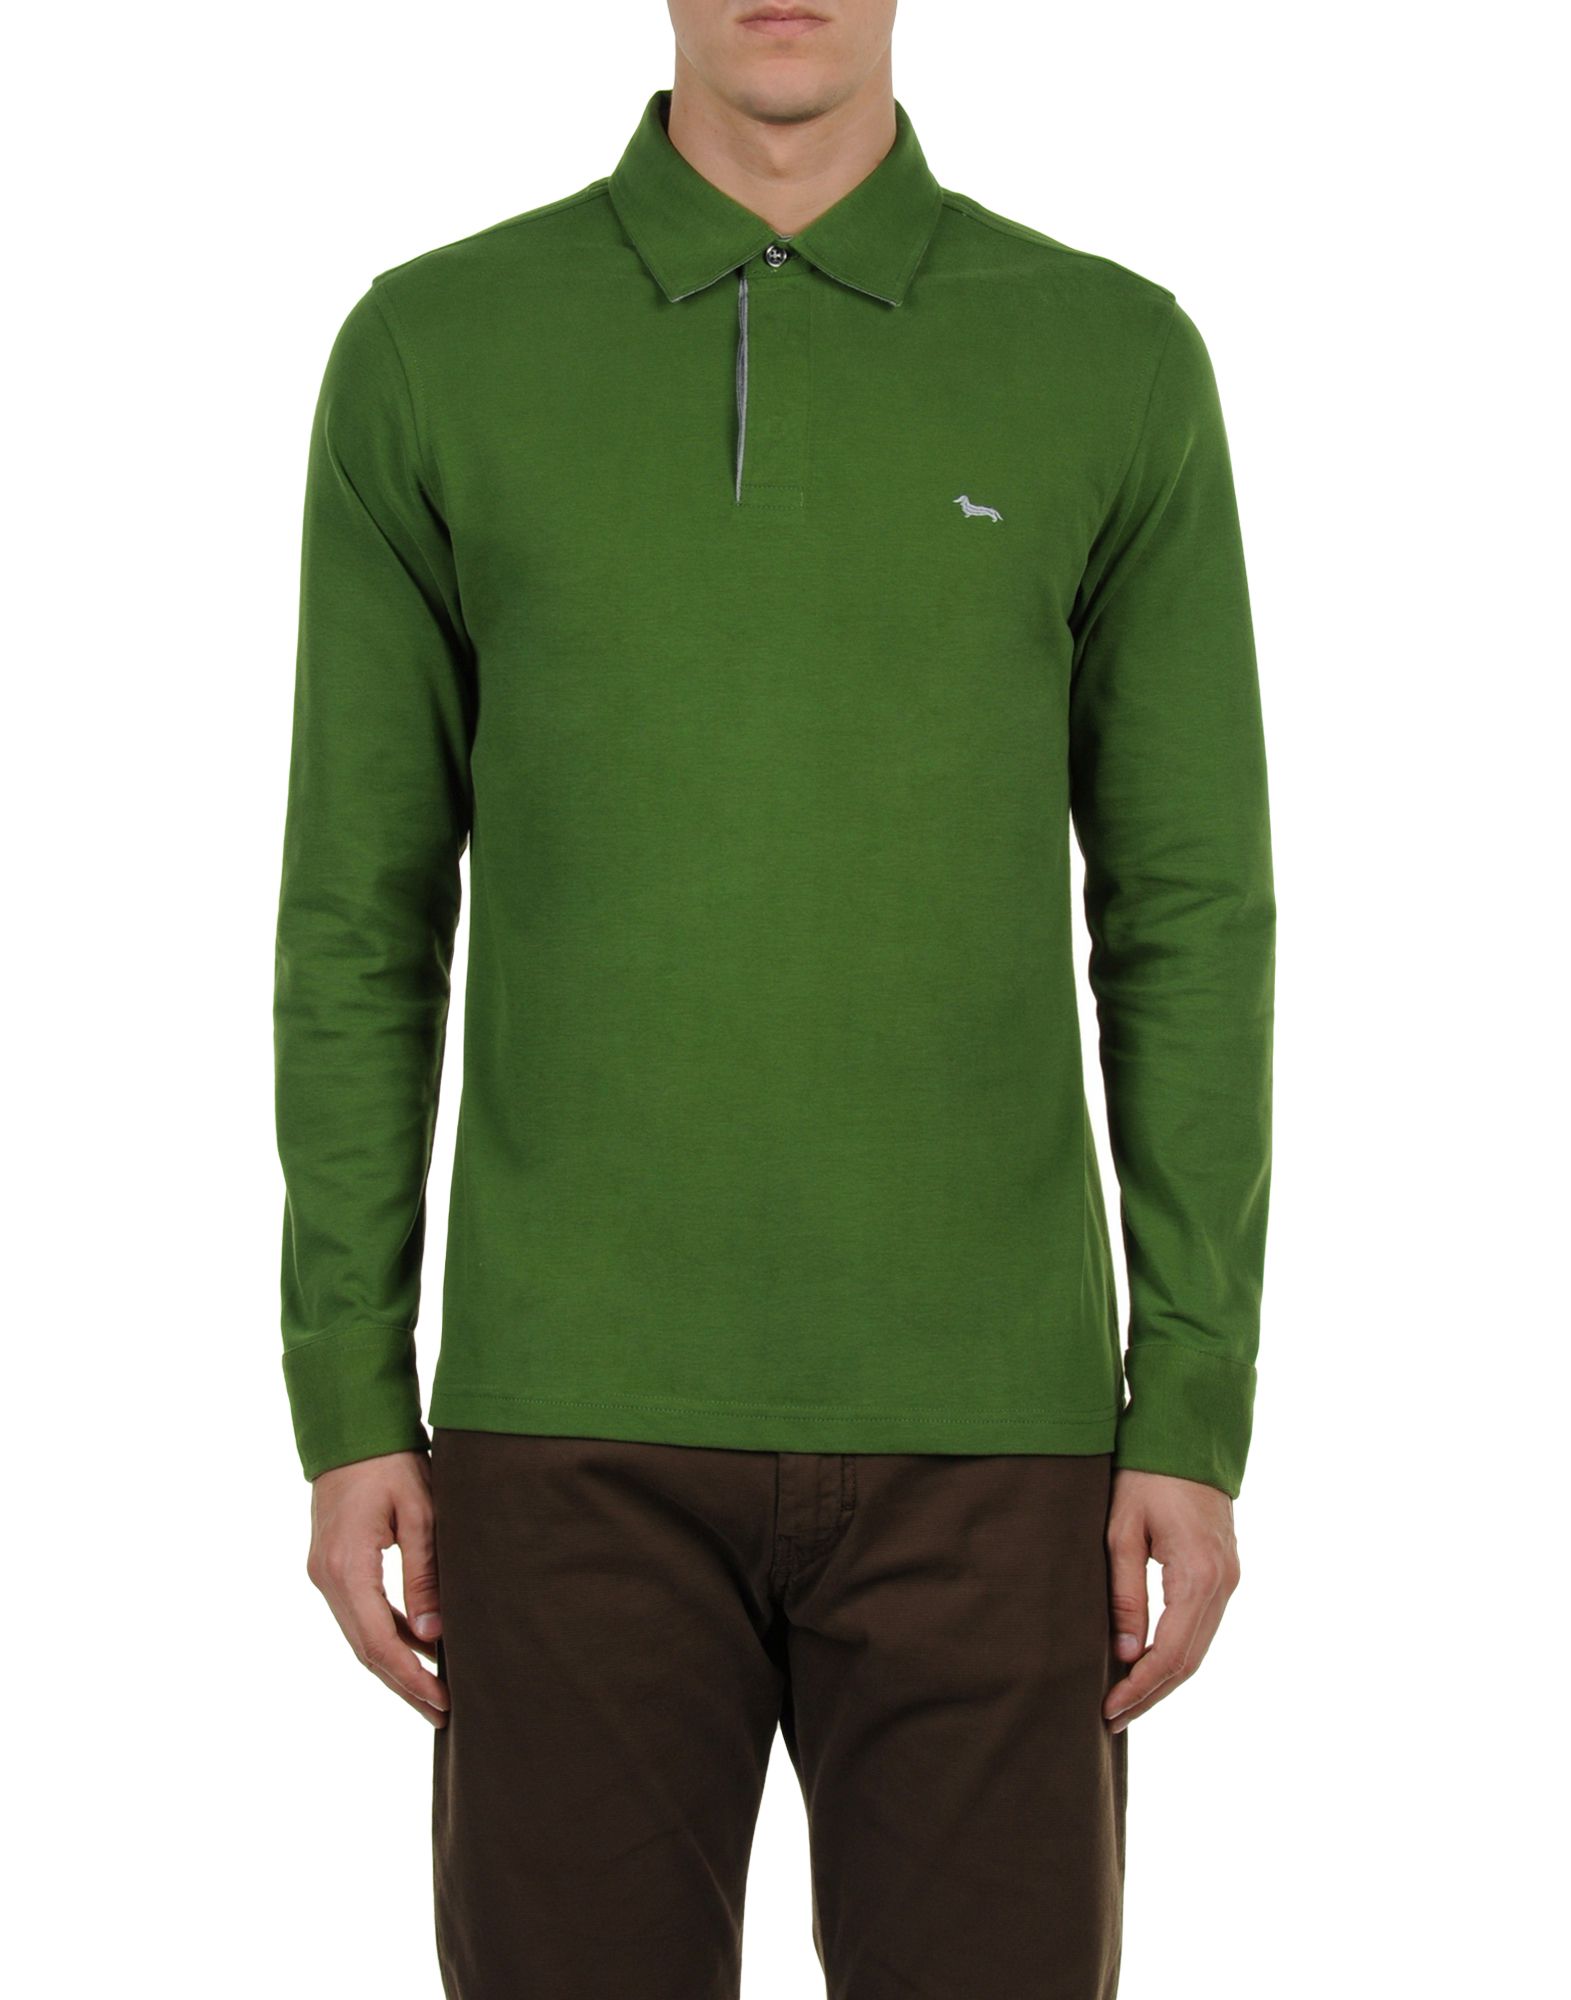 Harmont & blaine Polo Shirt in Green for Men - Save 46% | Lyst